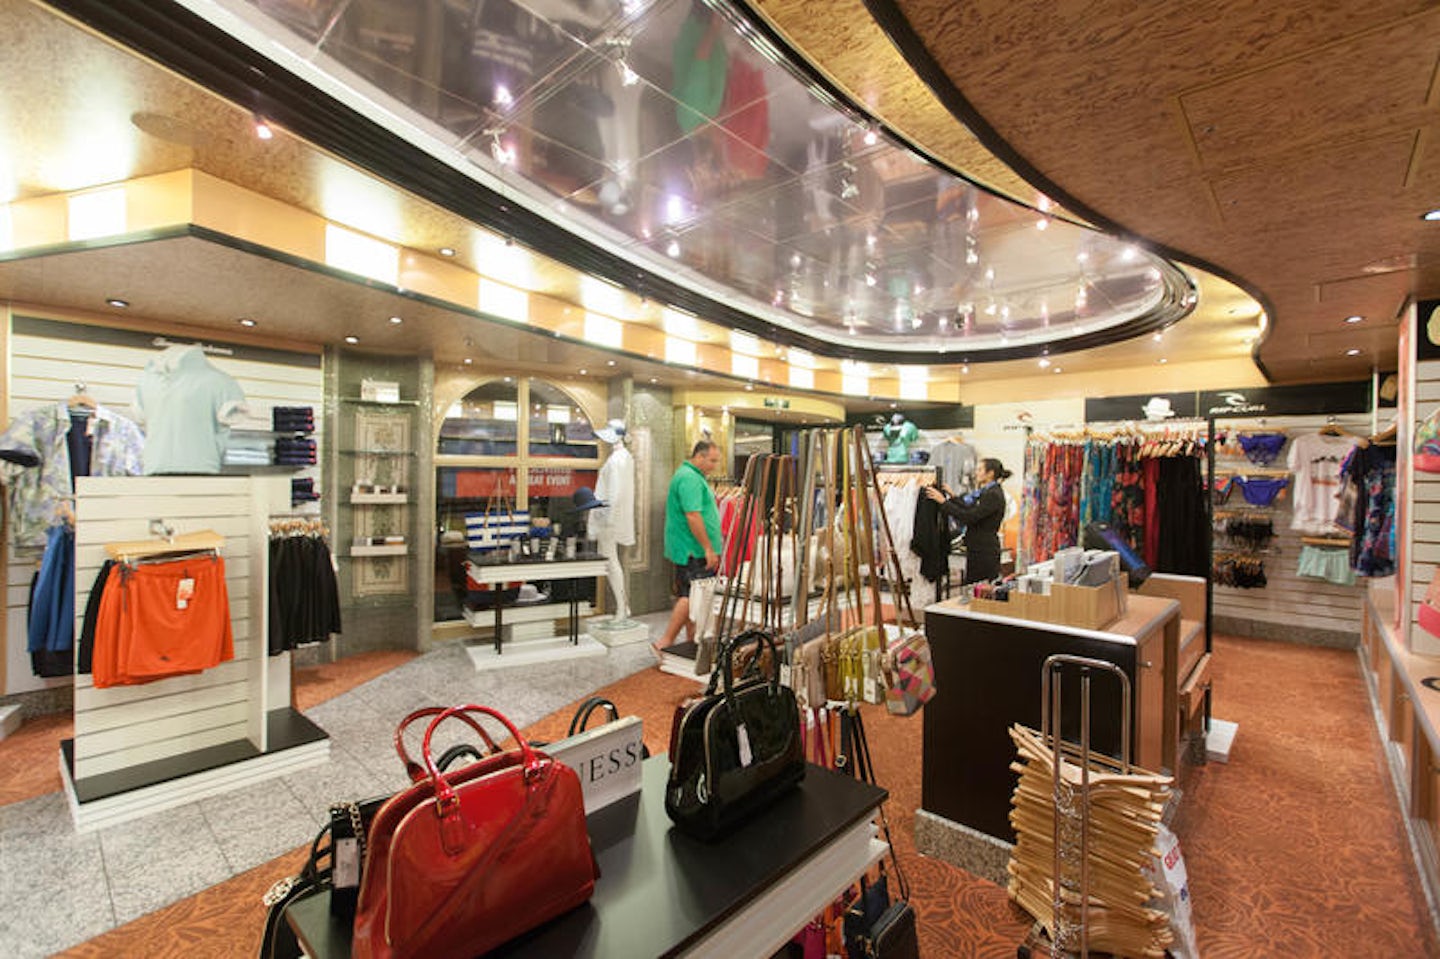 Fun Shops on Carnival Conquest